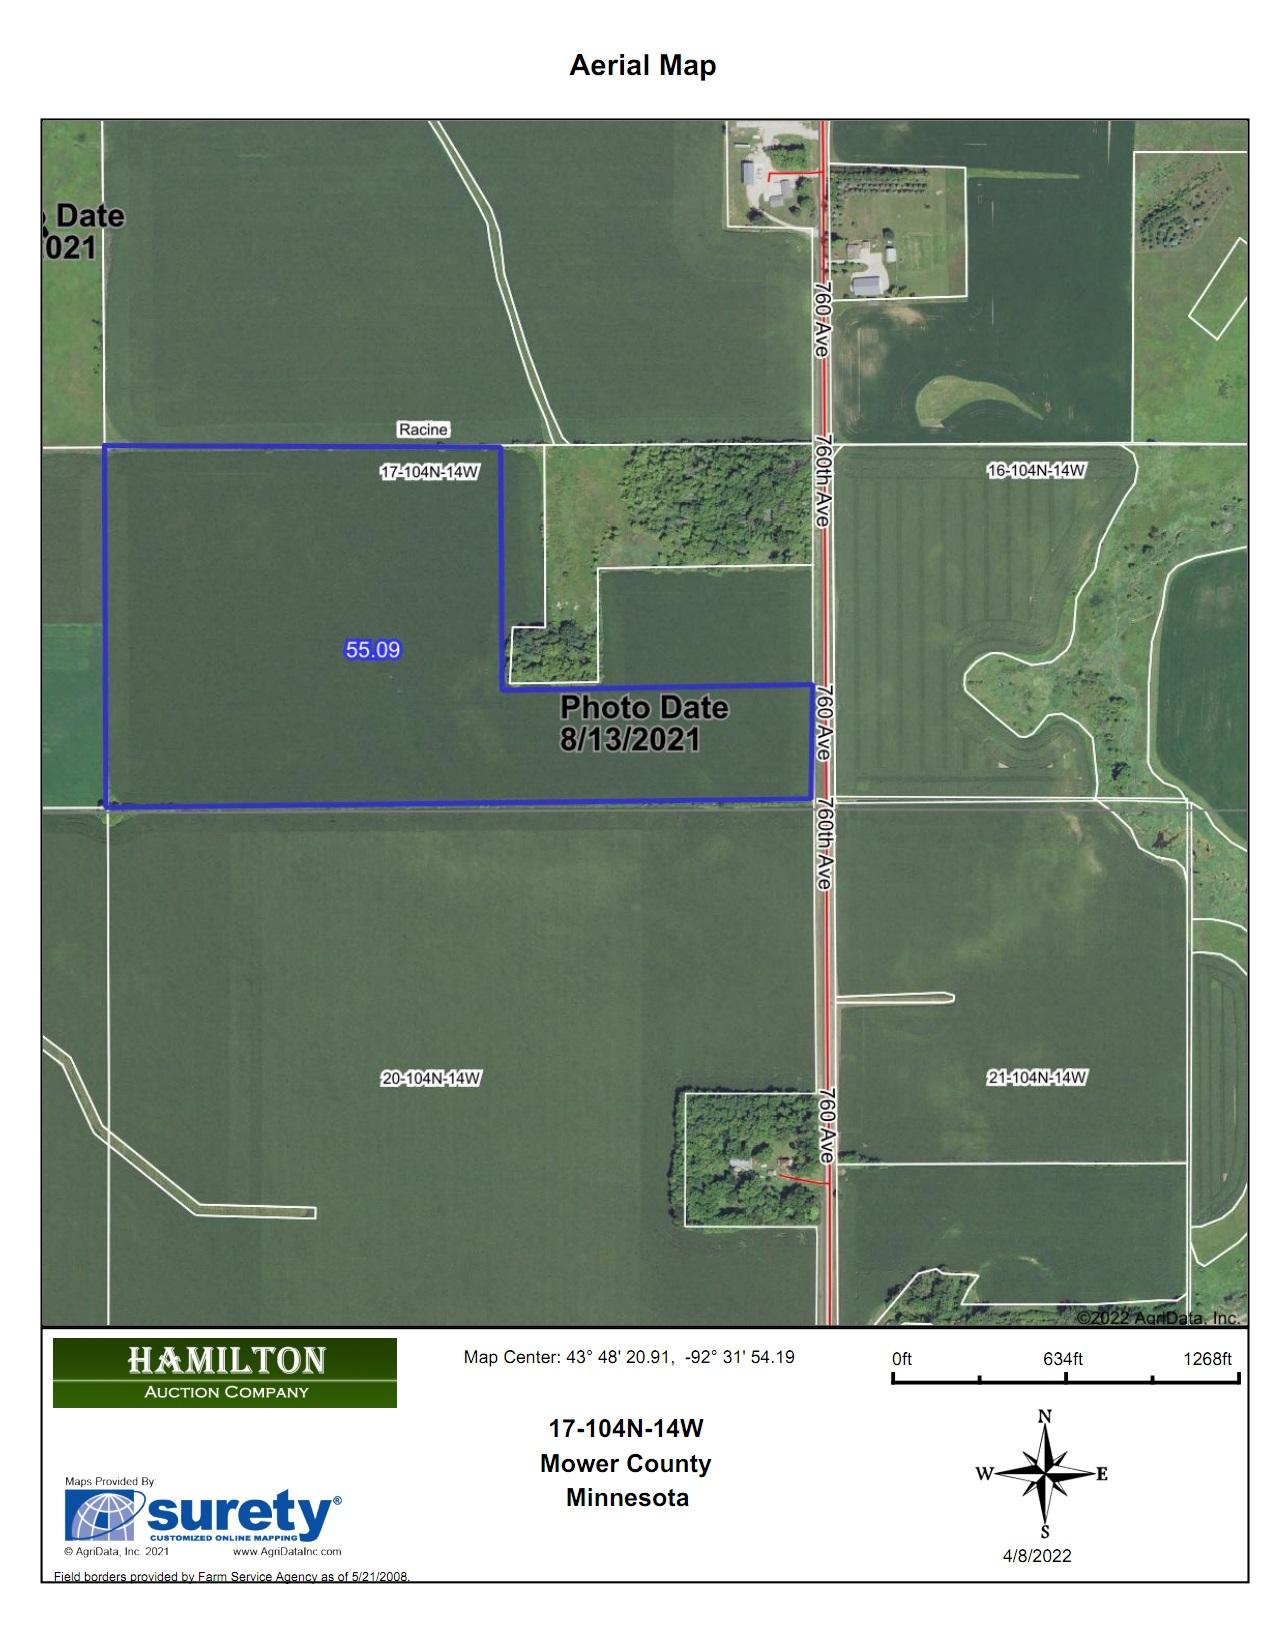 Land Auction 55 Acres Located in Racine Township